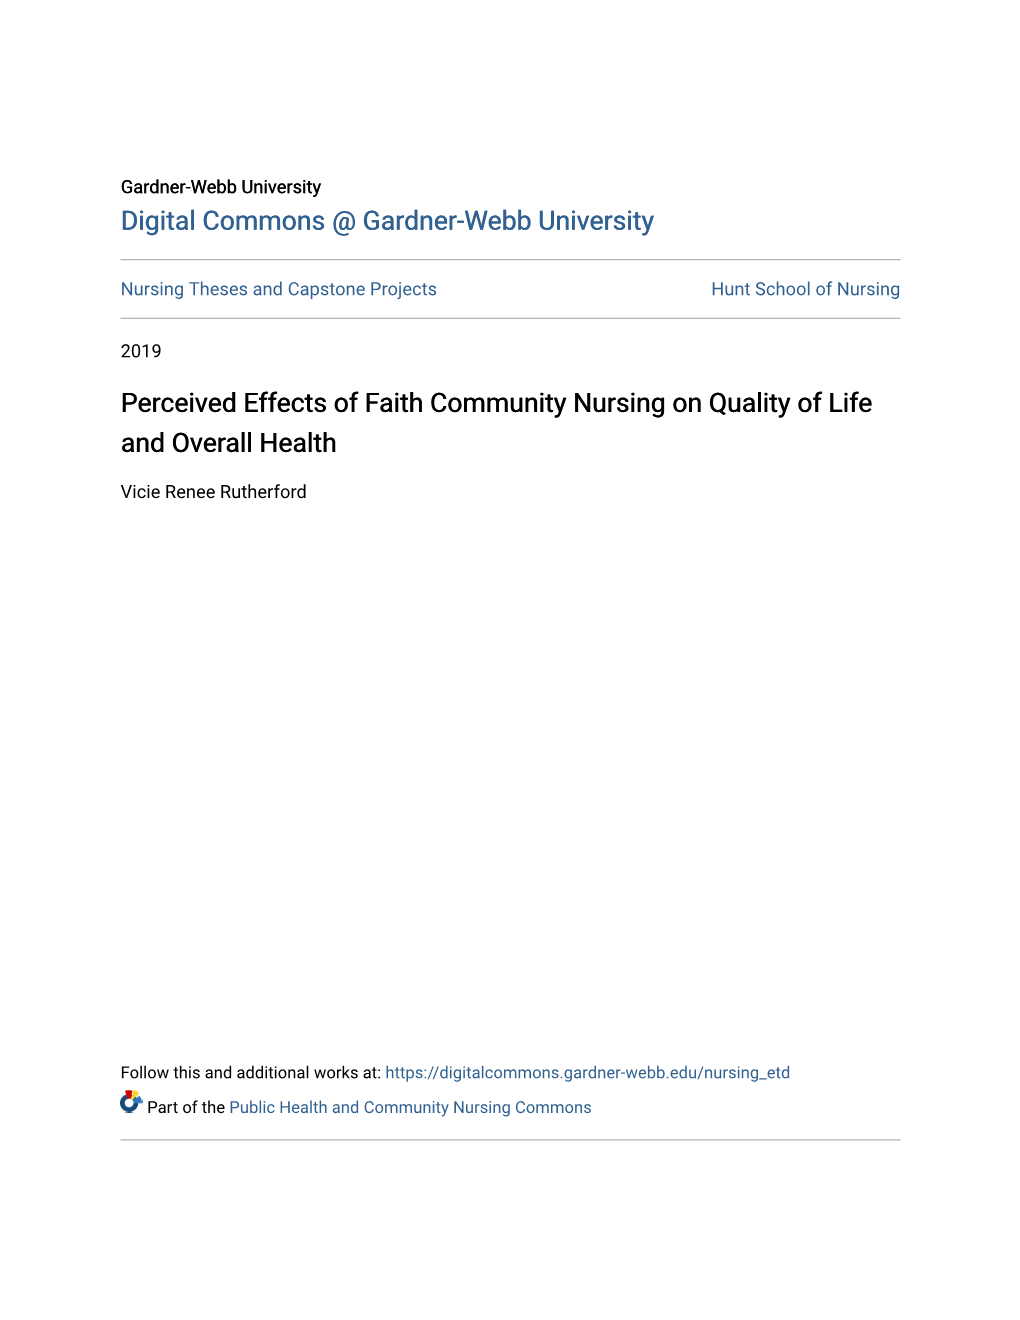 Perceived Effects of Faith Community Nursing on Quality of Life and Overall Health